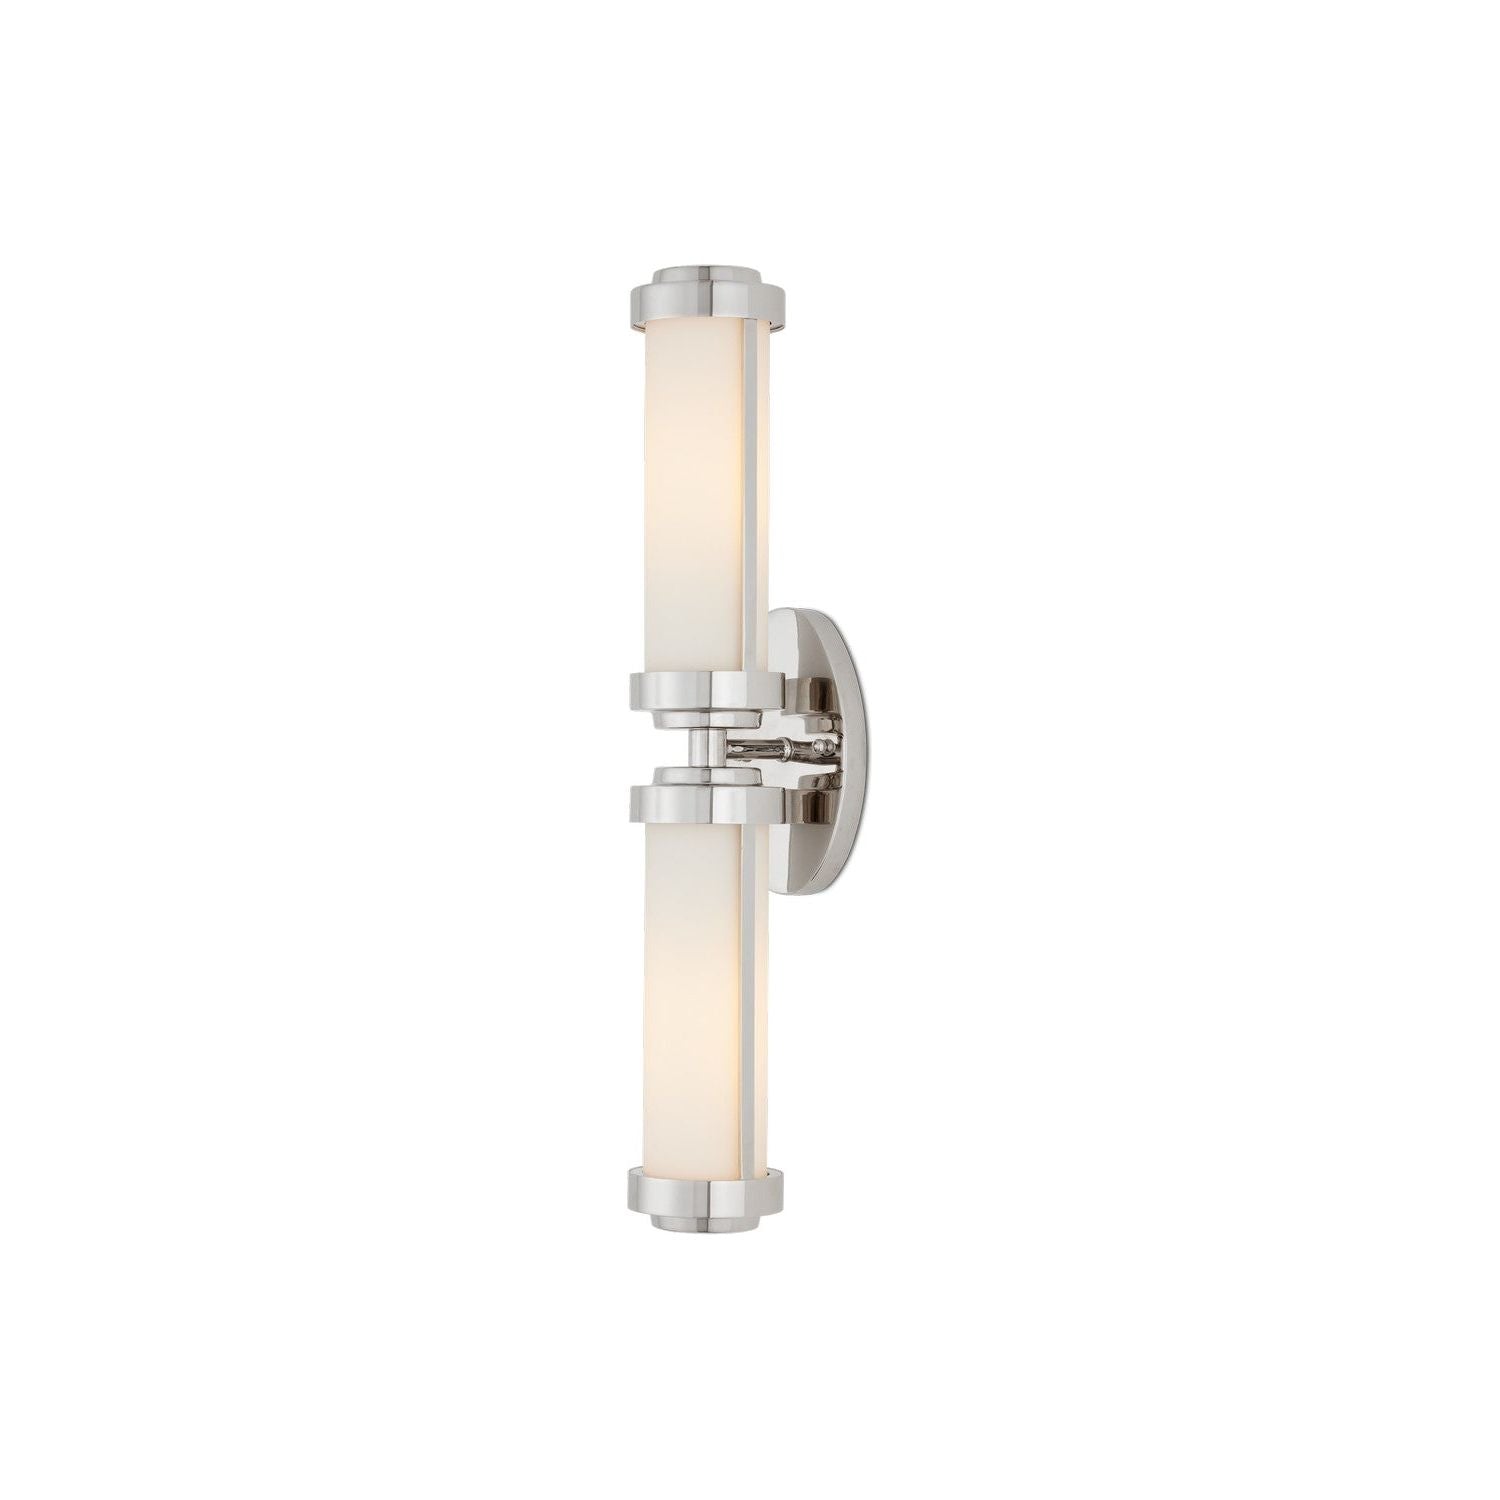 Currey and Company - 5800-0043 - Two Light Wall Sconce - Polished Nickel/Opaque